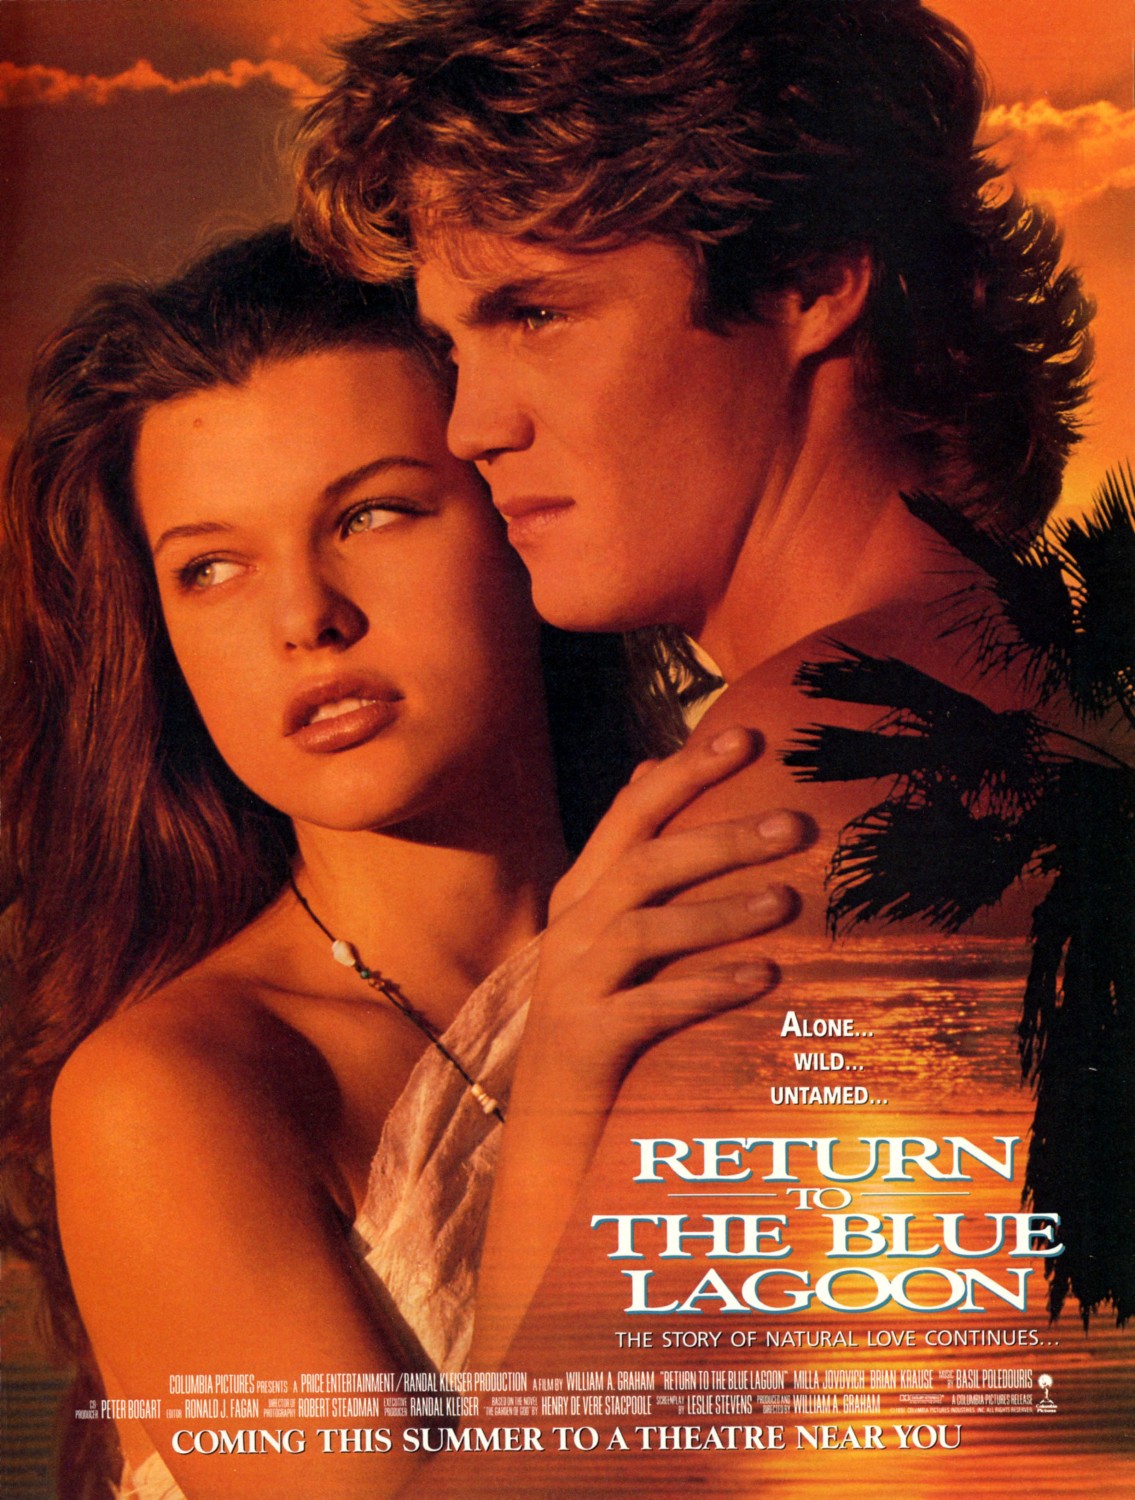 The Blue Lagoon Full Movie Download Filmywap